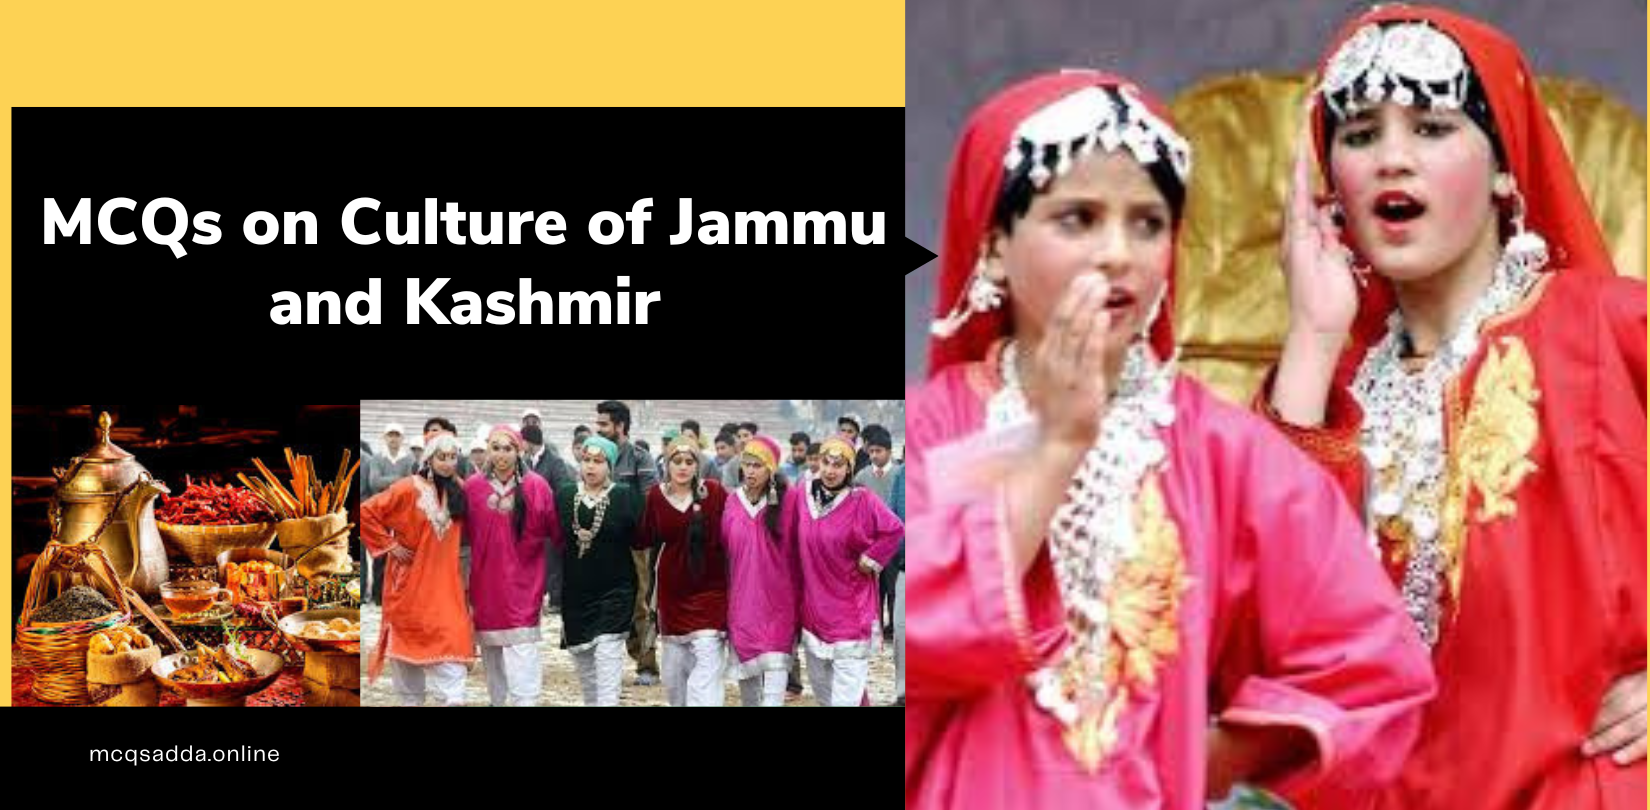 MCQs on Culture of Jammu and Kashmir